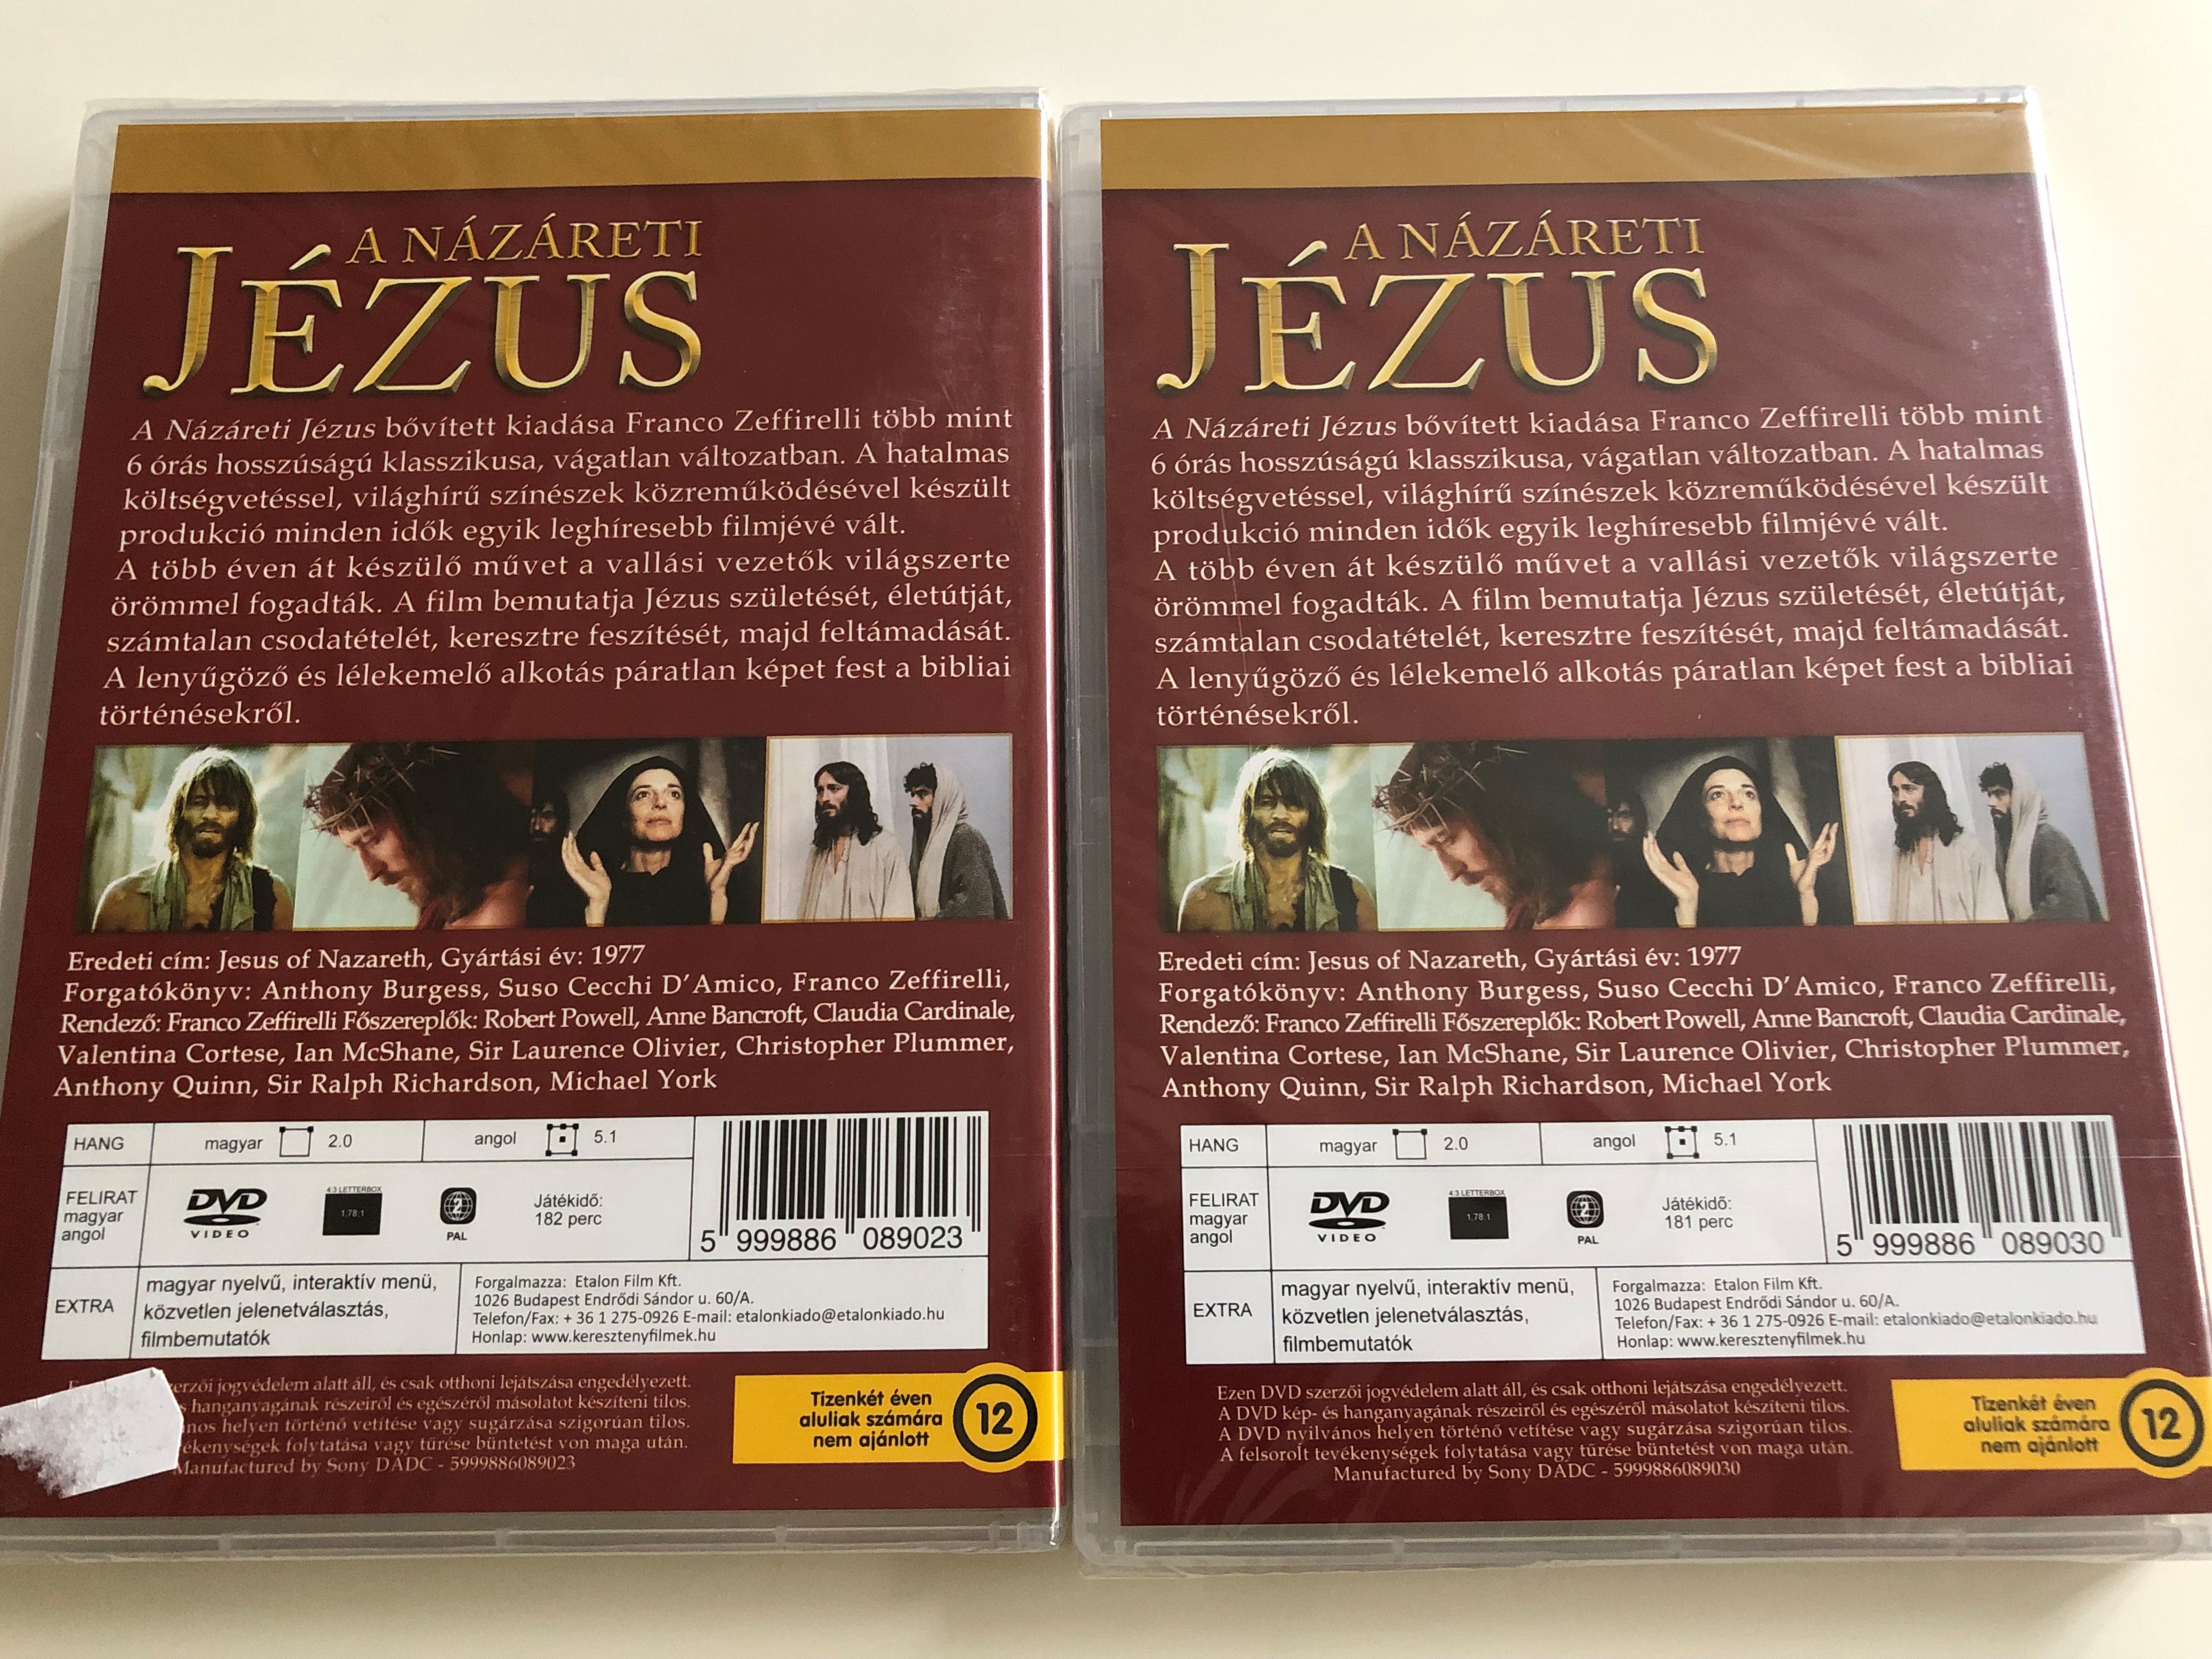 jesus-of-nazareth-dvd-set-1977-a-n-z-reti-j-zus-directed-by-franco-zeffirelli-starring-robert-powell-anne-bancroft-claudia-cardinale-valentina-cortese-ian-mcshane-sir-laurence-olivier-extended-remastered-edition-2.jpg